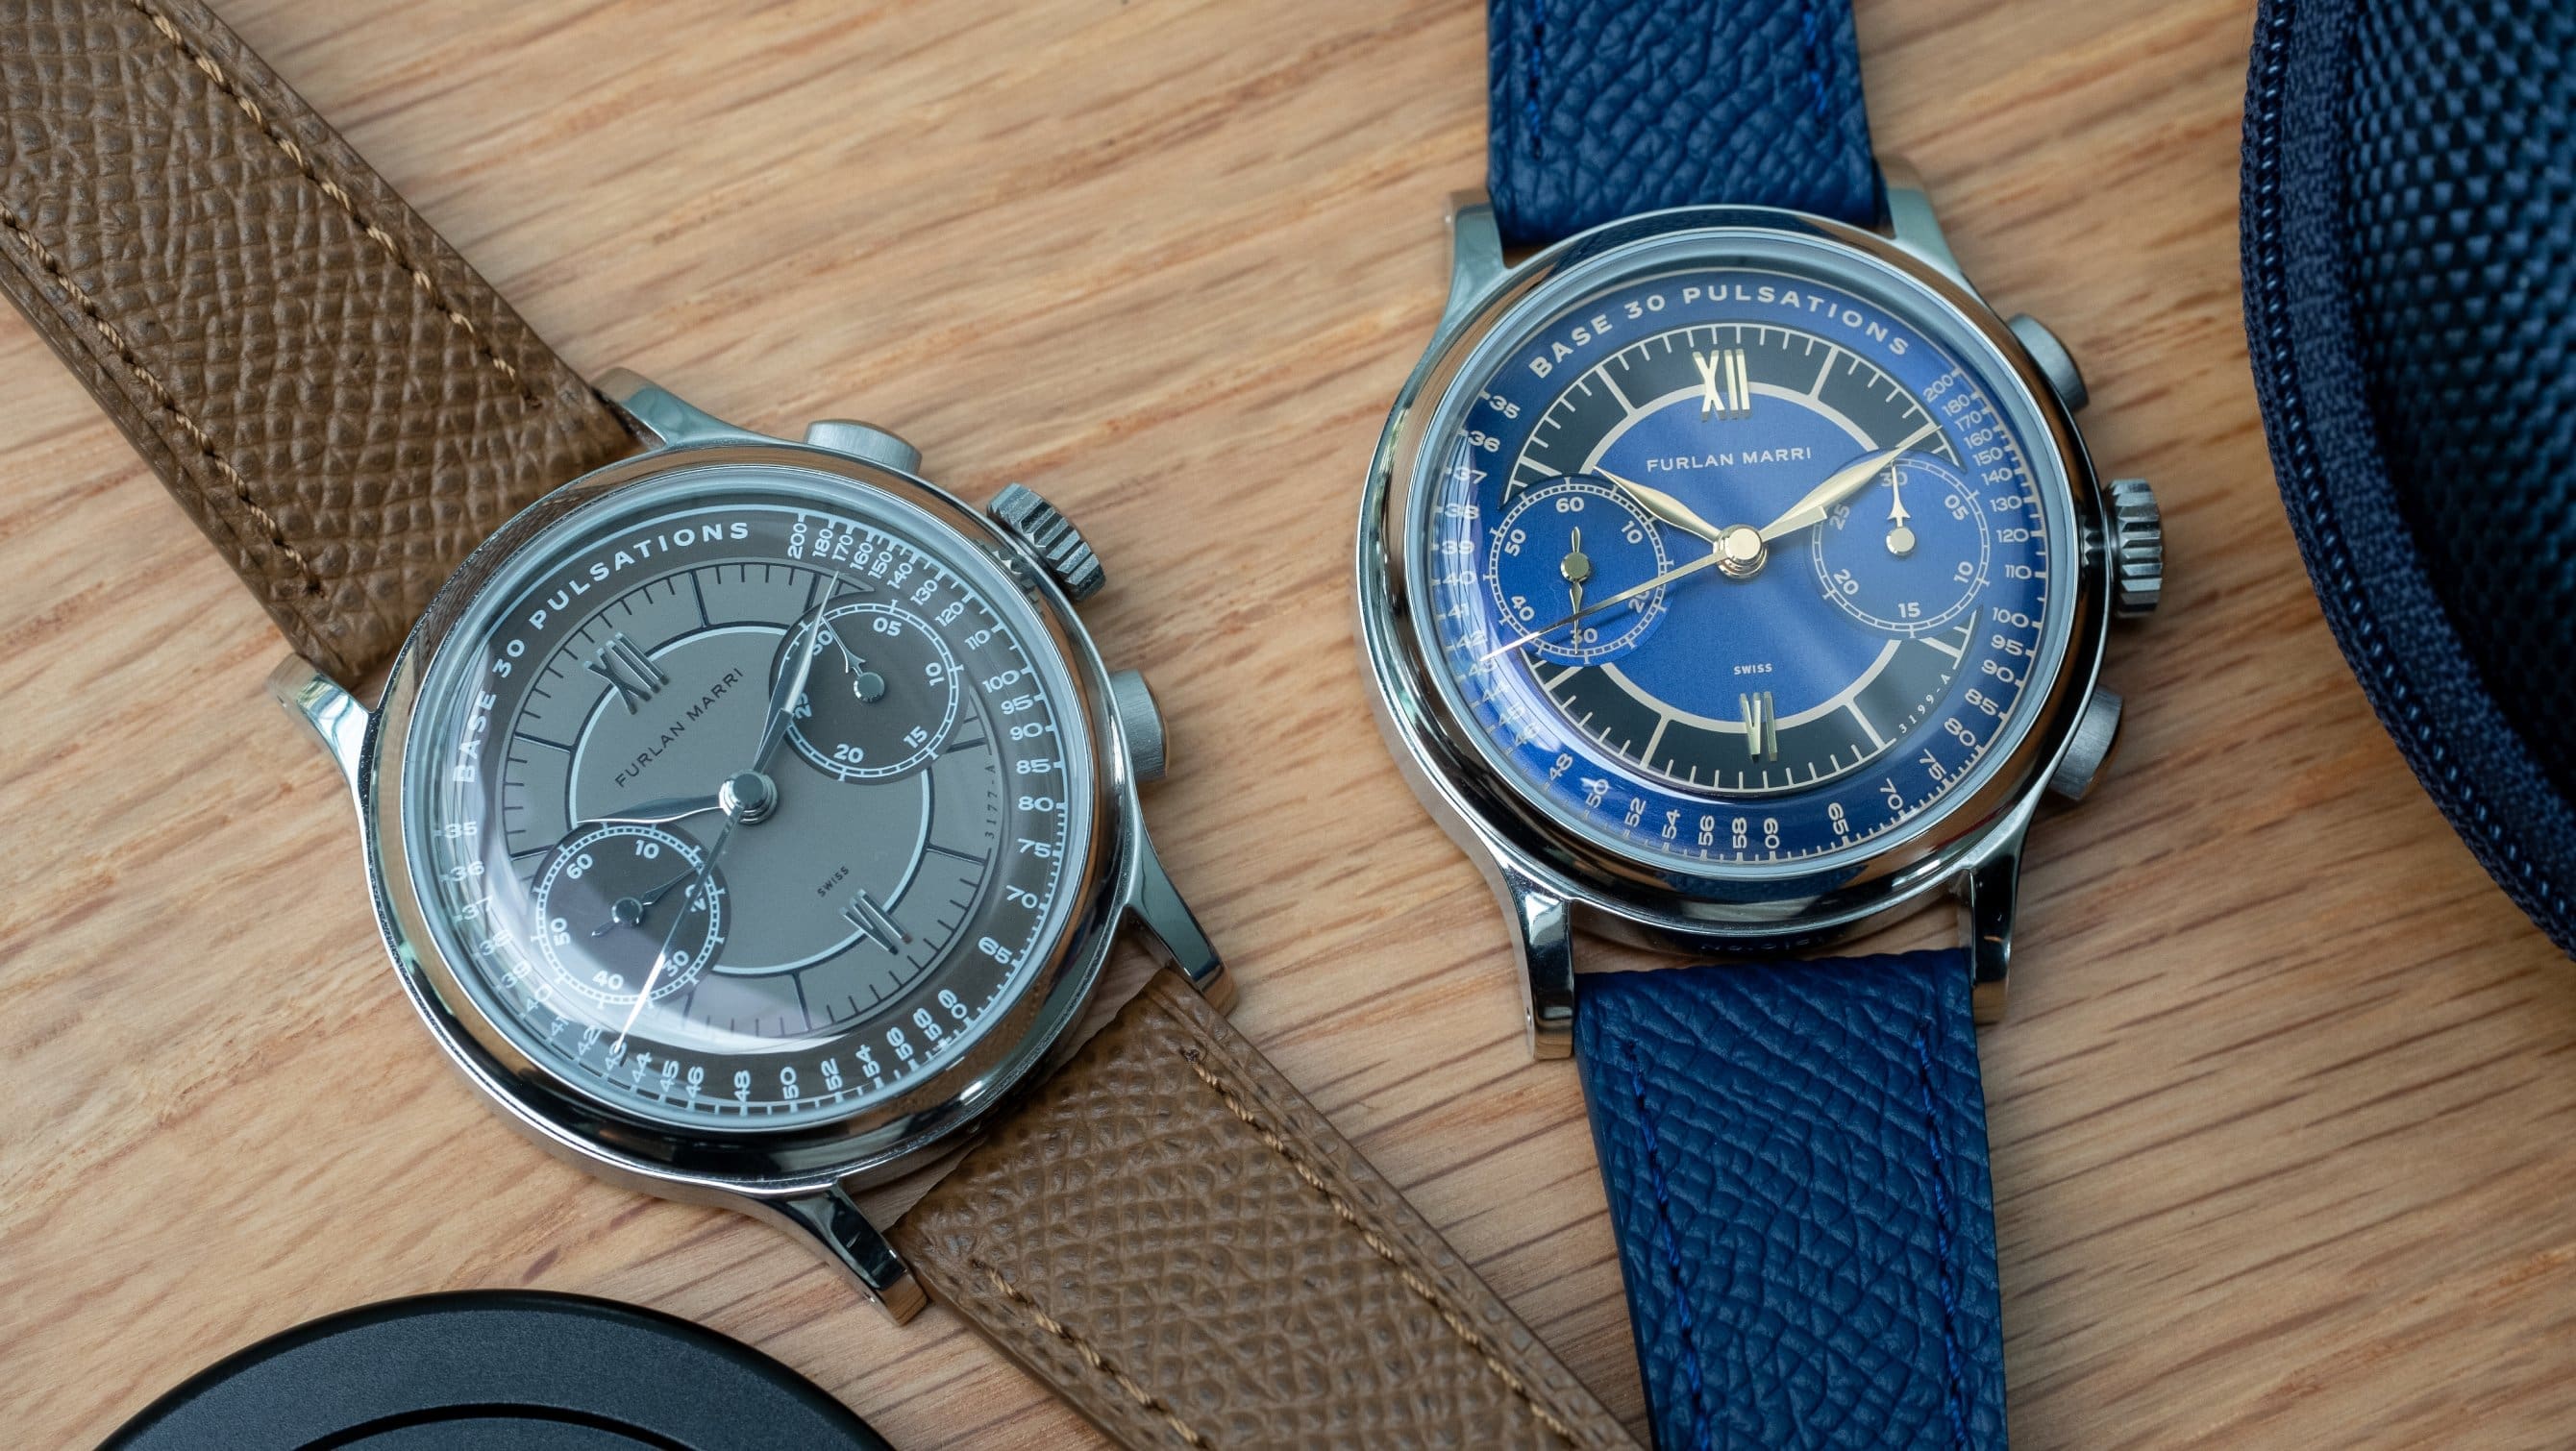 The Furlan Marri Flyback, and where it slots into the brand line-up